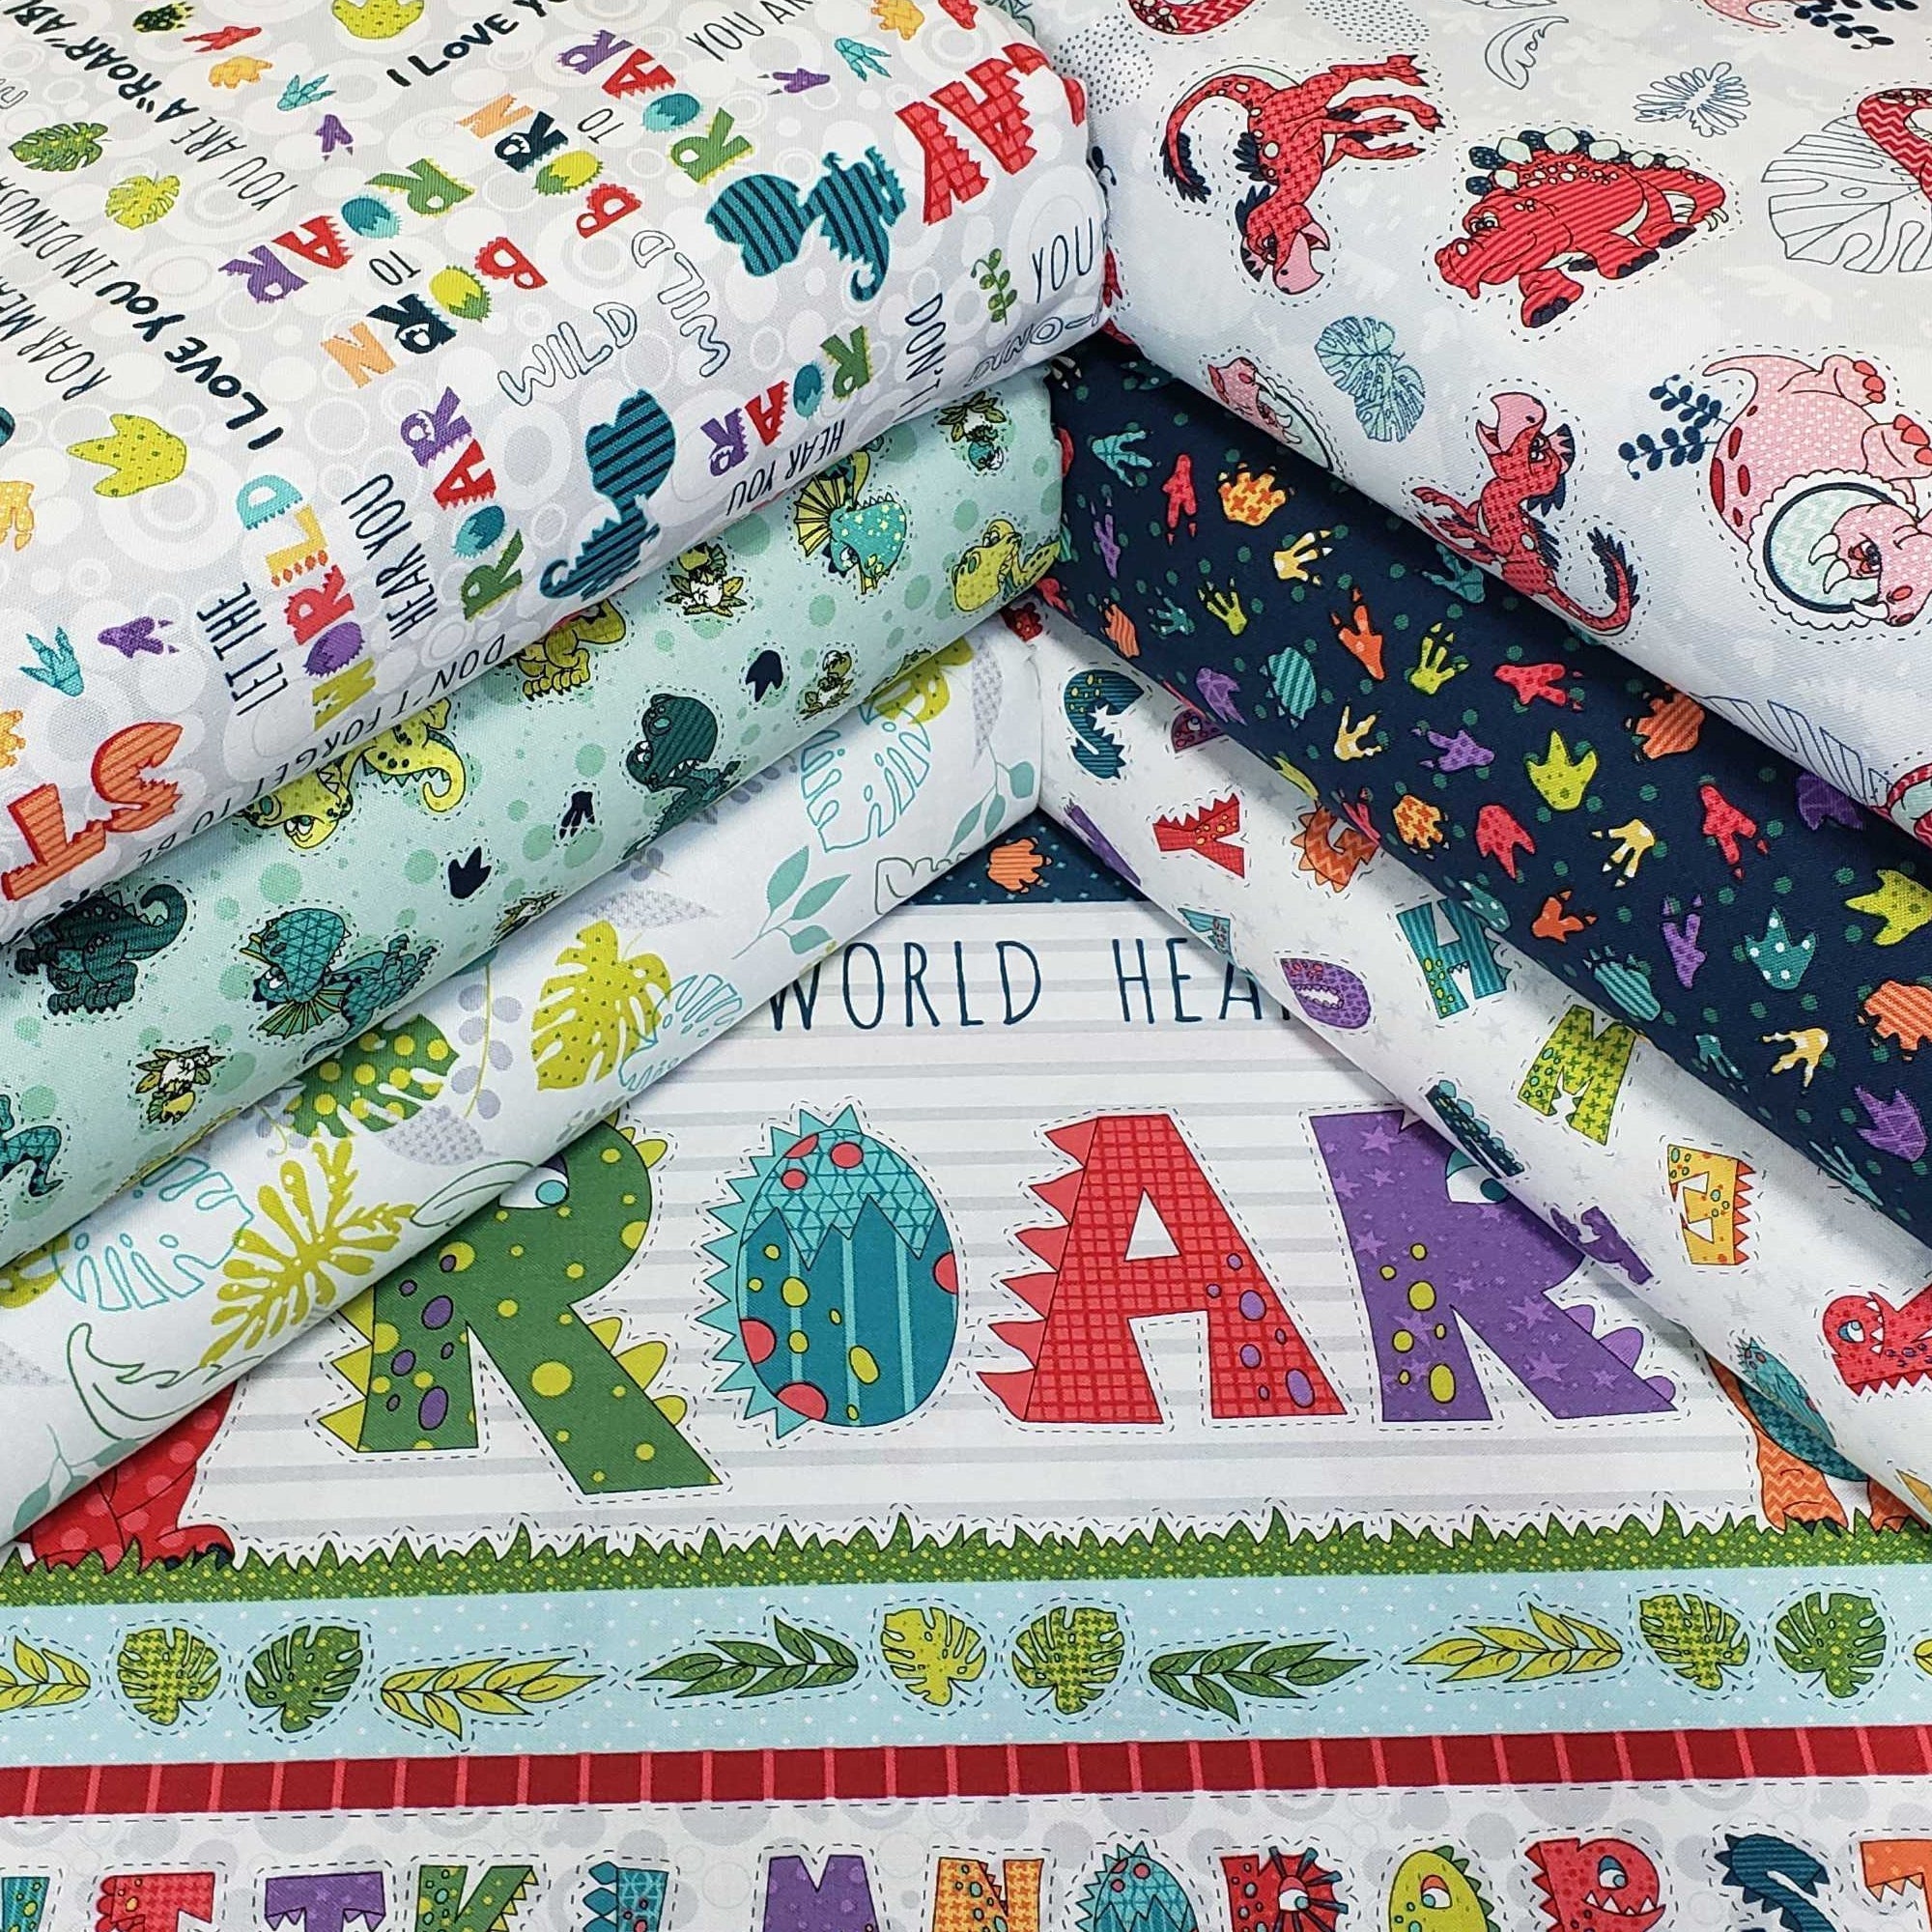 Born to Roar Fabric Collection by Leanne Anderson & Kaytlyn Kuebler ...